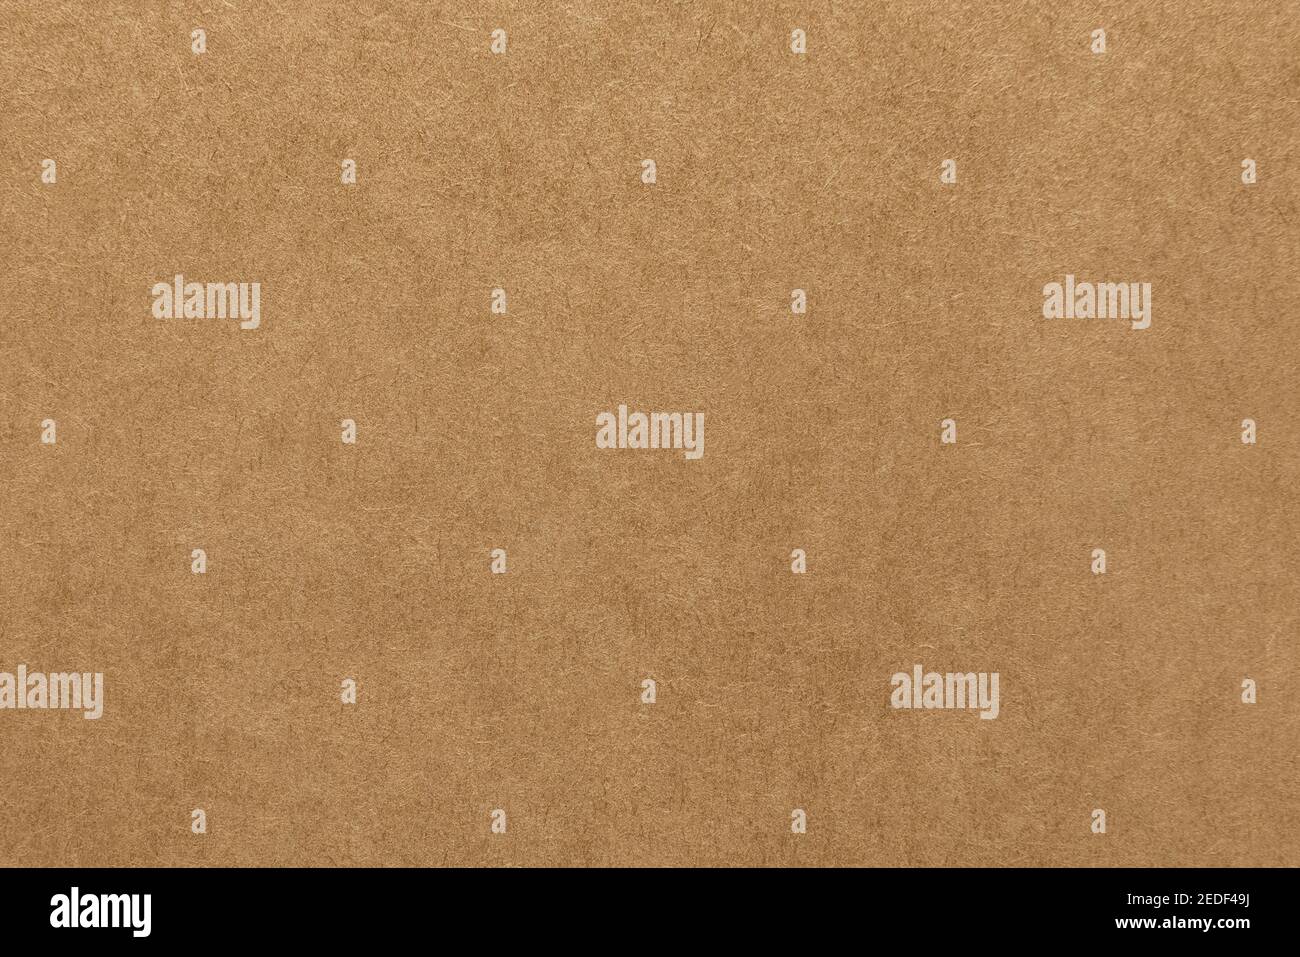 Rough light brown kraft paper with pulp texture for background Stock Photo